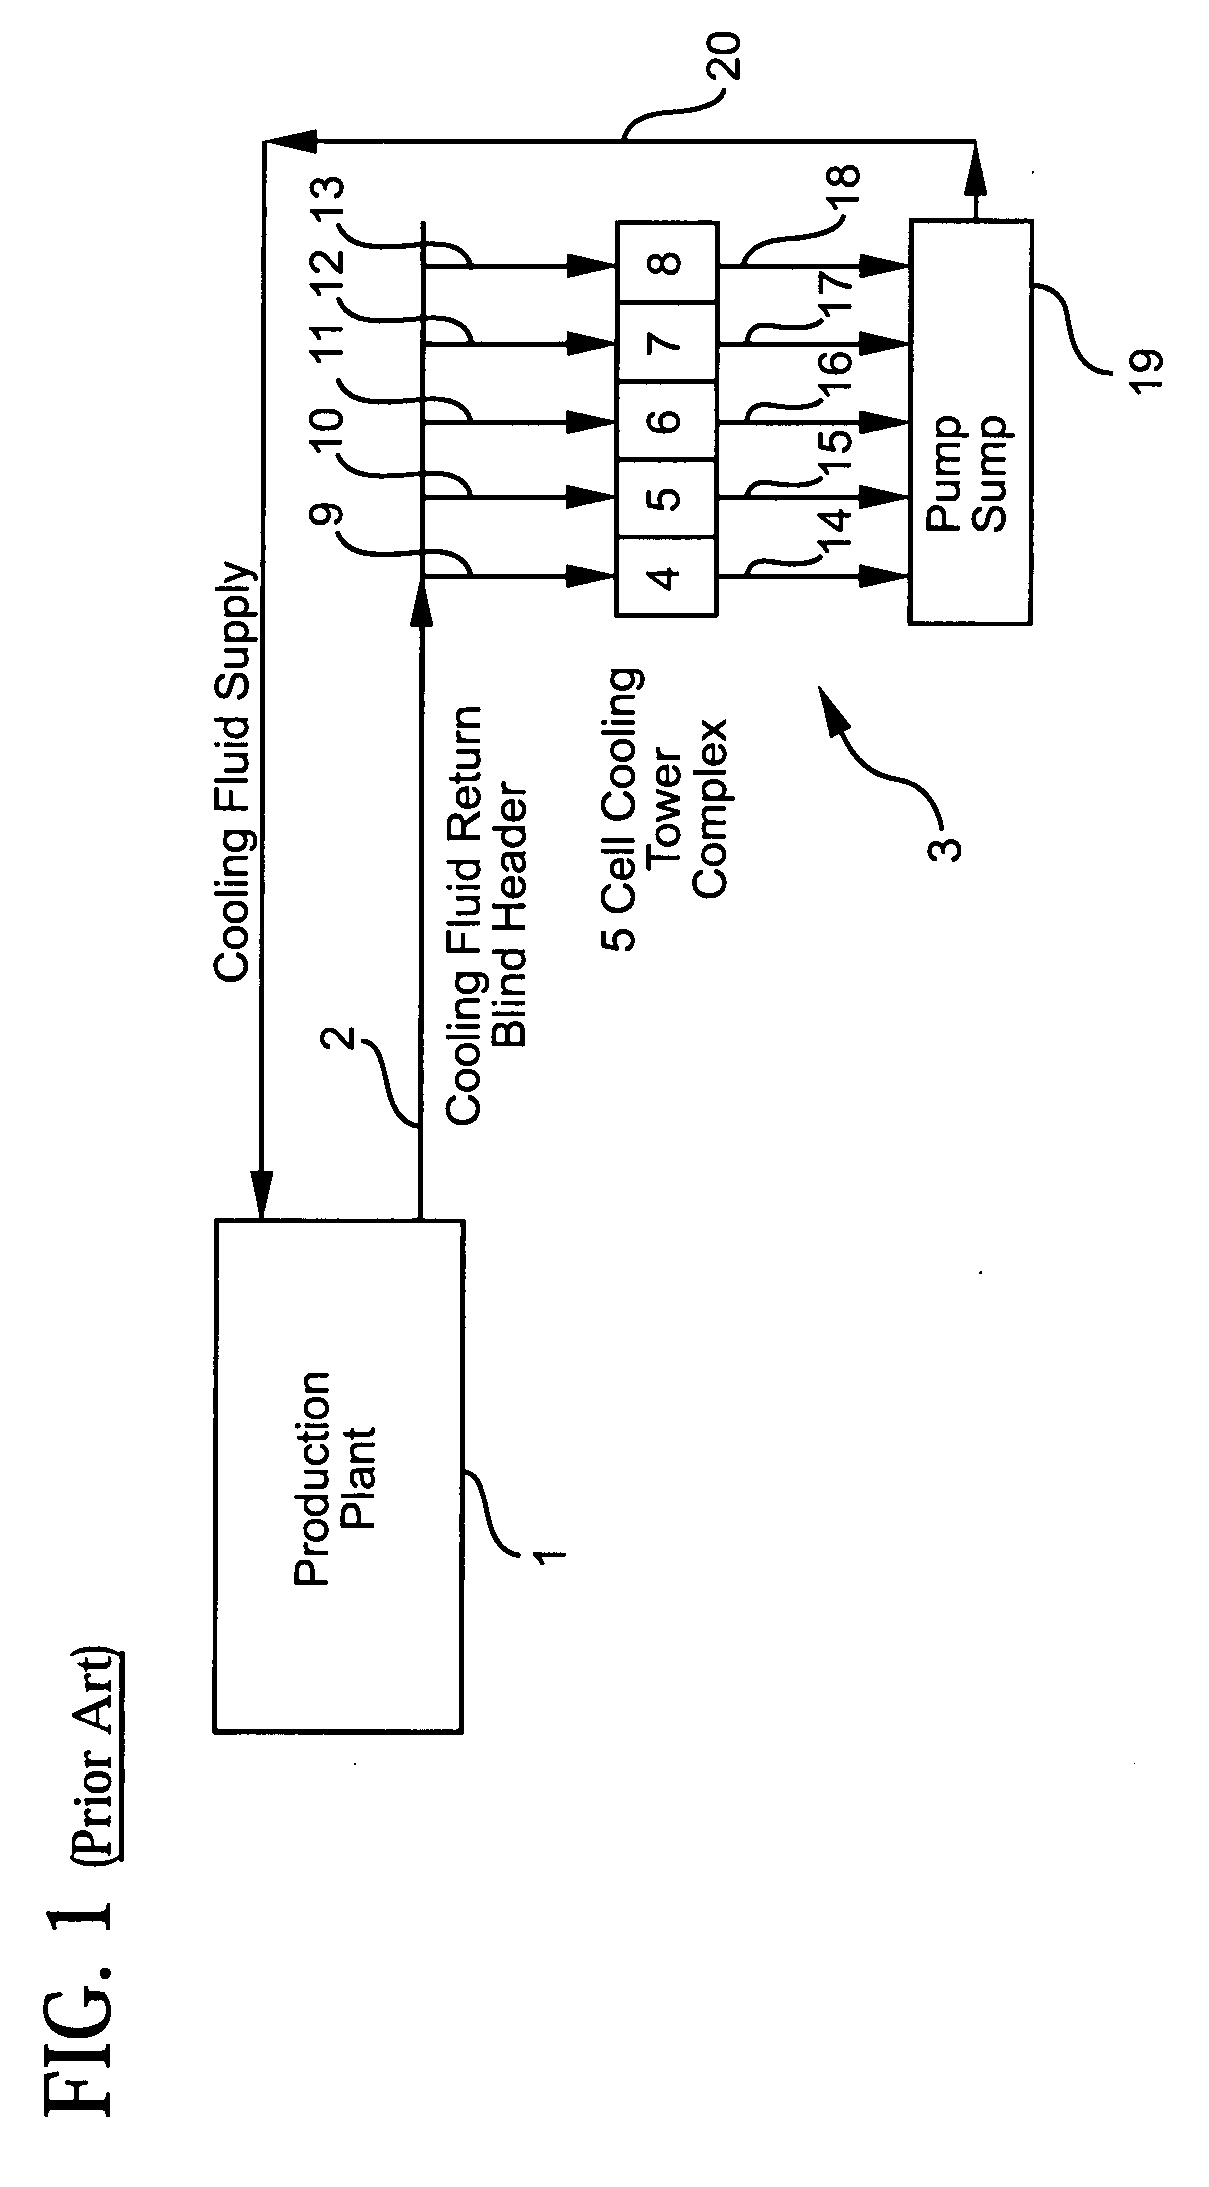 Method of operating a cooling fluid system